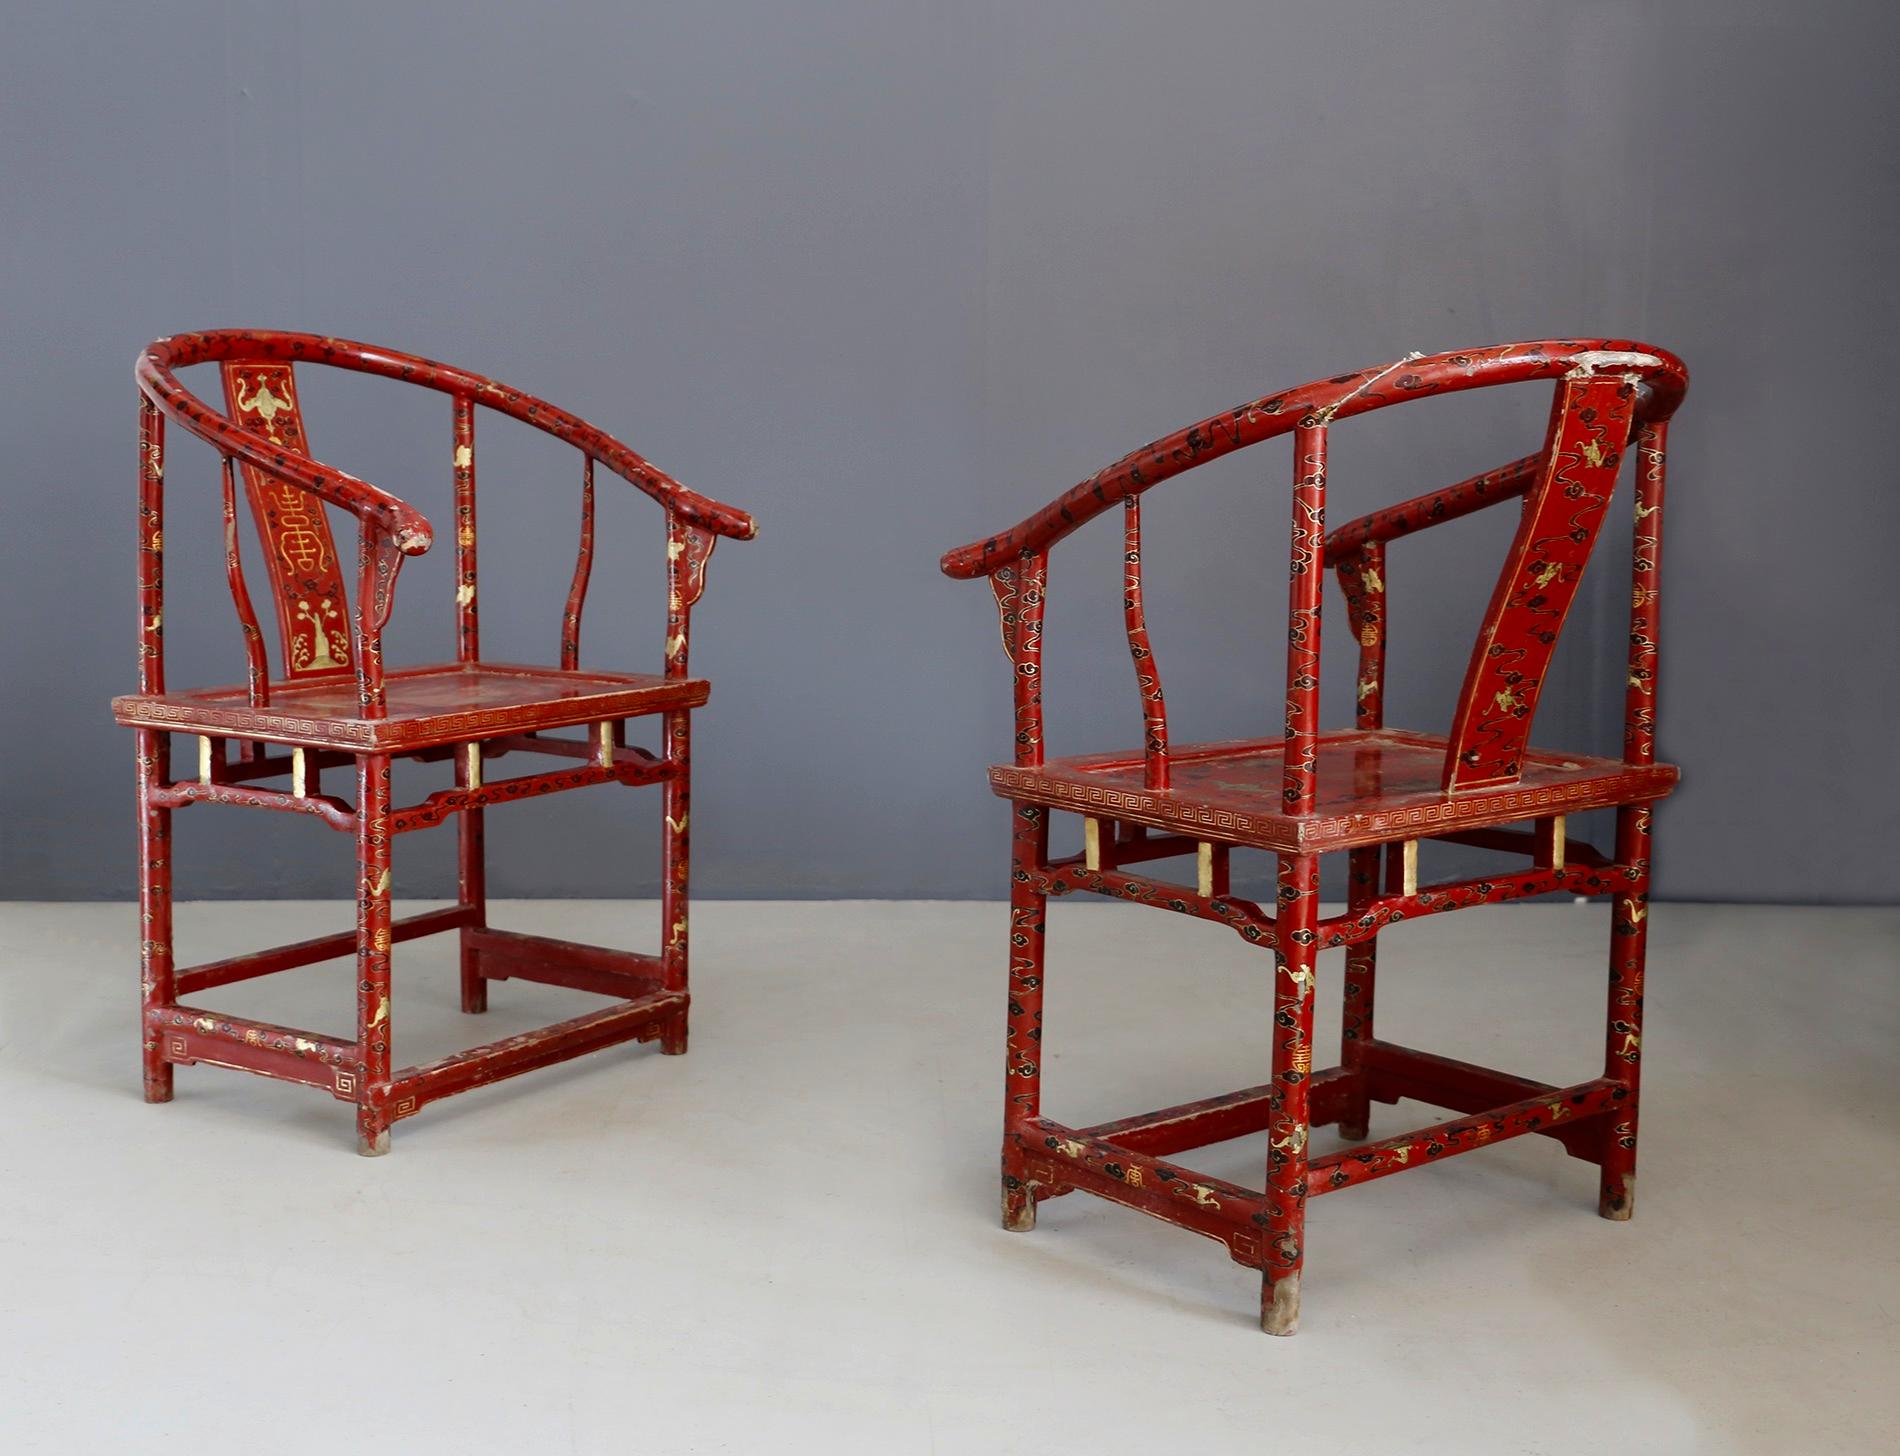 Large and very elegant and well-made pair of Chinese armchairs from the late 1800s. The pair of armchairs is in curved wood. The backrest is curved and is paneled with friezes depicting figures of flora and ornaments. The very bulky armrests have